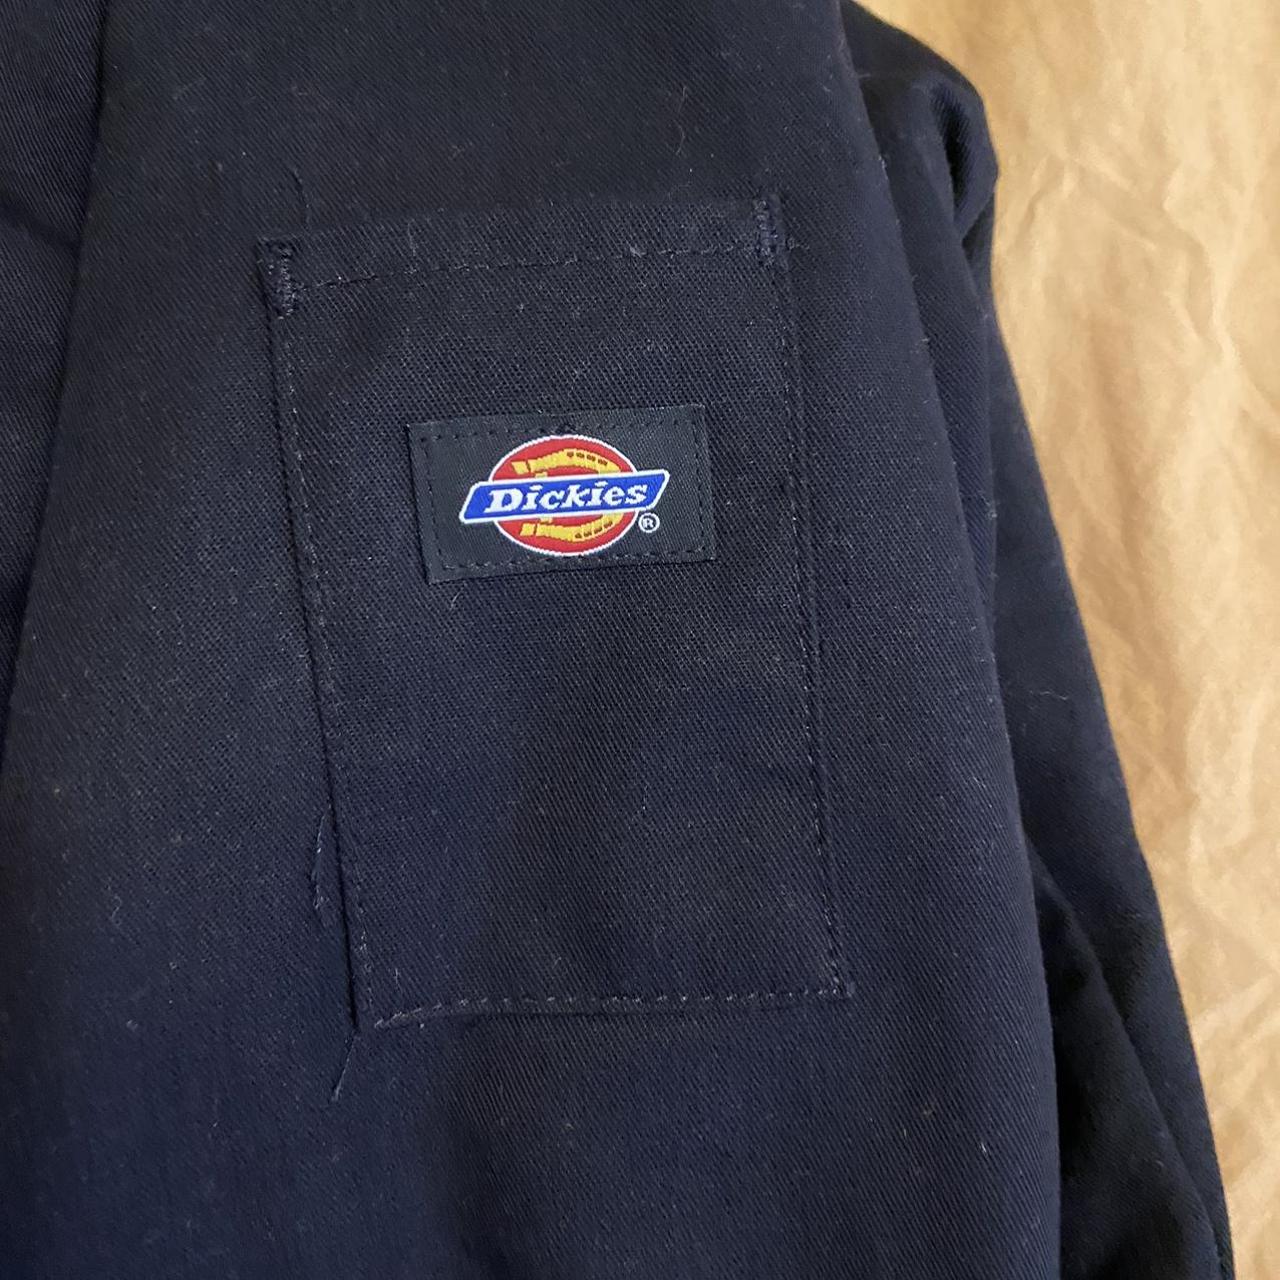 Dickies bomber jacket Fully lined Made in... - Depop